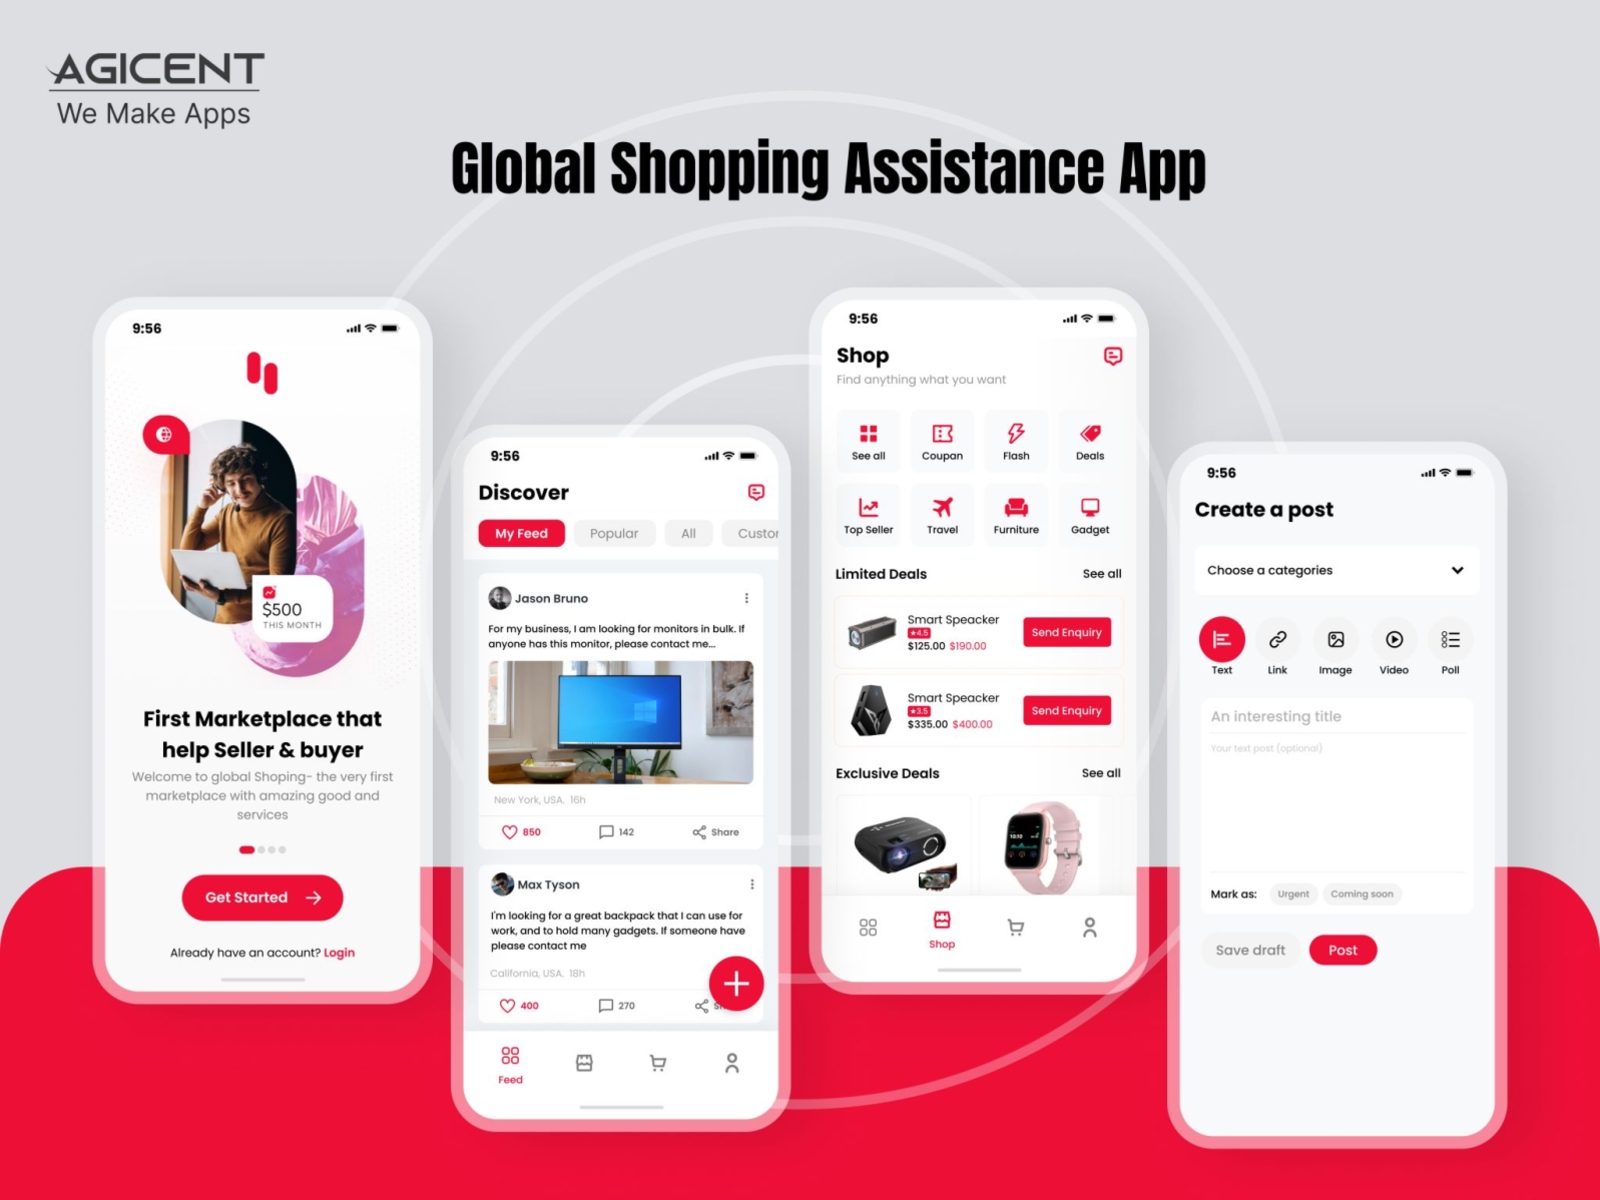 Global Shopping Assistance App agicent android app app design create an app design global shopping global shopping assistance app ios app online global shopping online shop online shopping sale shop shop online shopping shopping assistance app shopping online ui ux